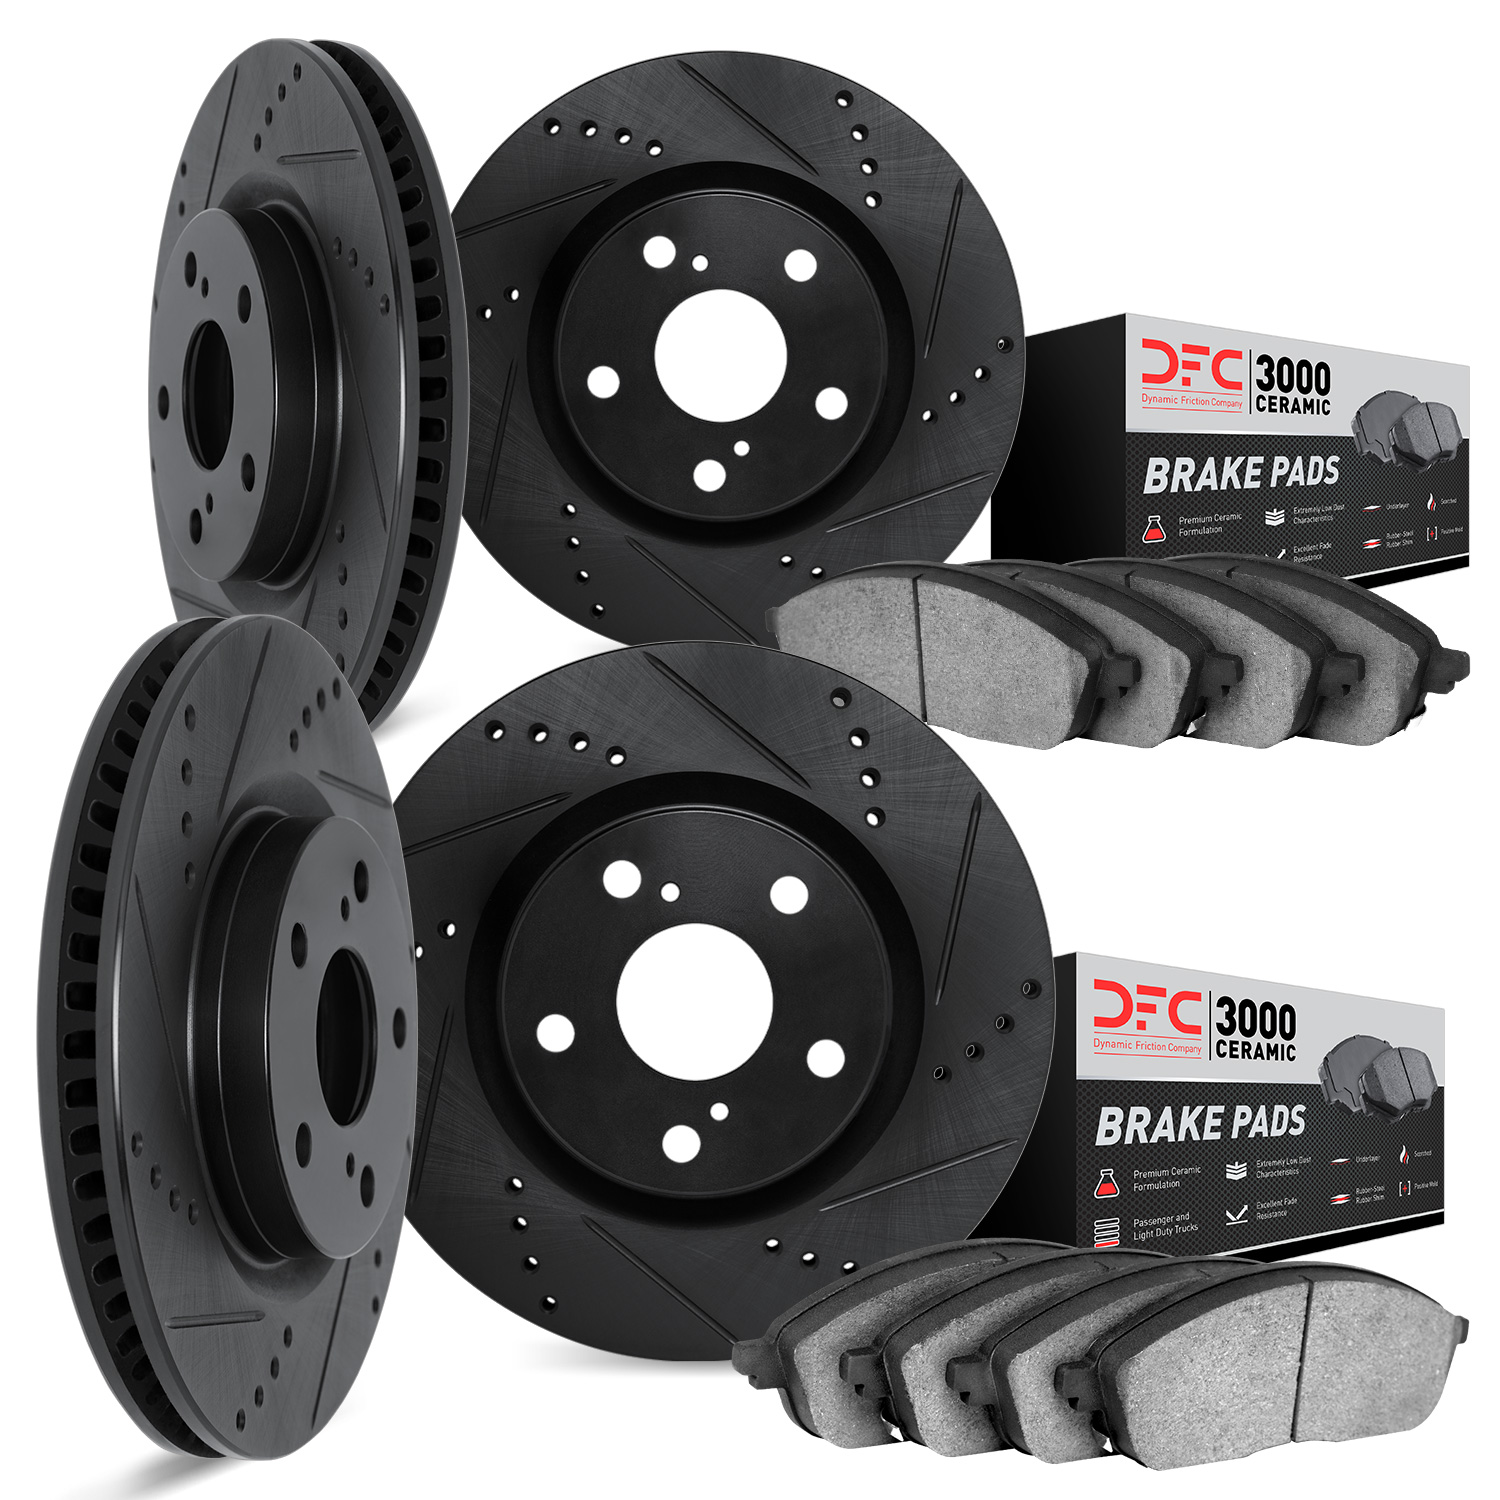 8304-27080 Drilled/Slotted Brake Rotors with 3000-Series Ceramic Brake Pads Kit [Black], 2017-2019 Volvo, Position: Front and Re